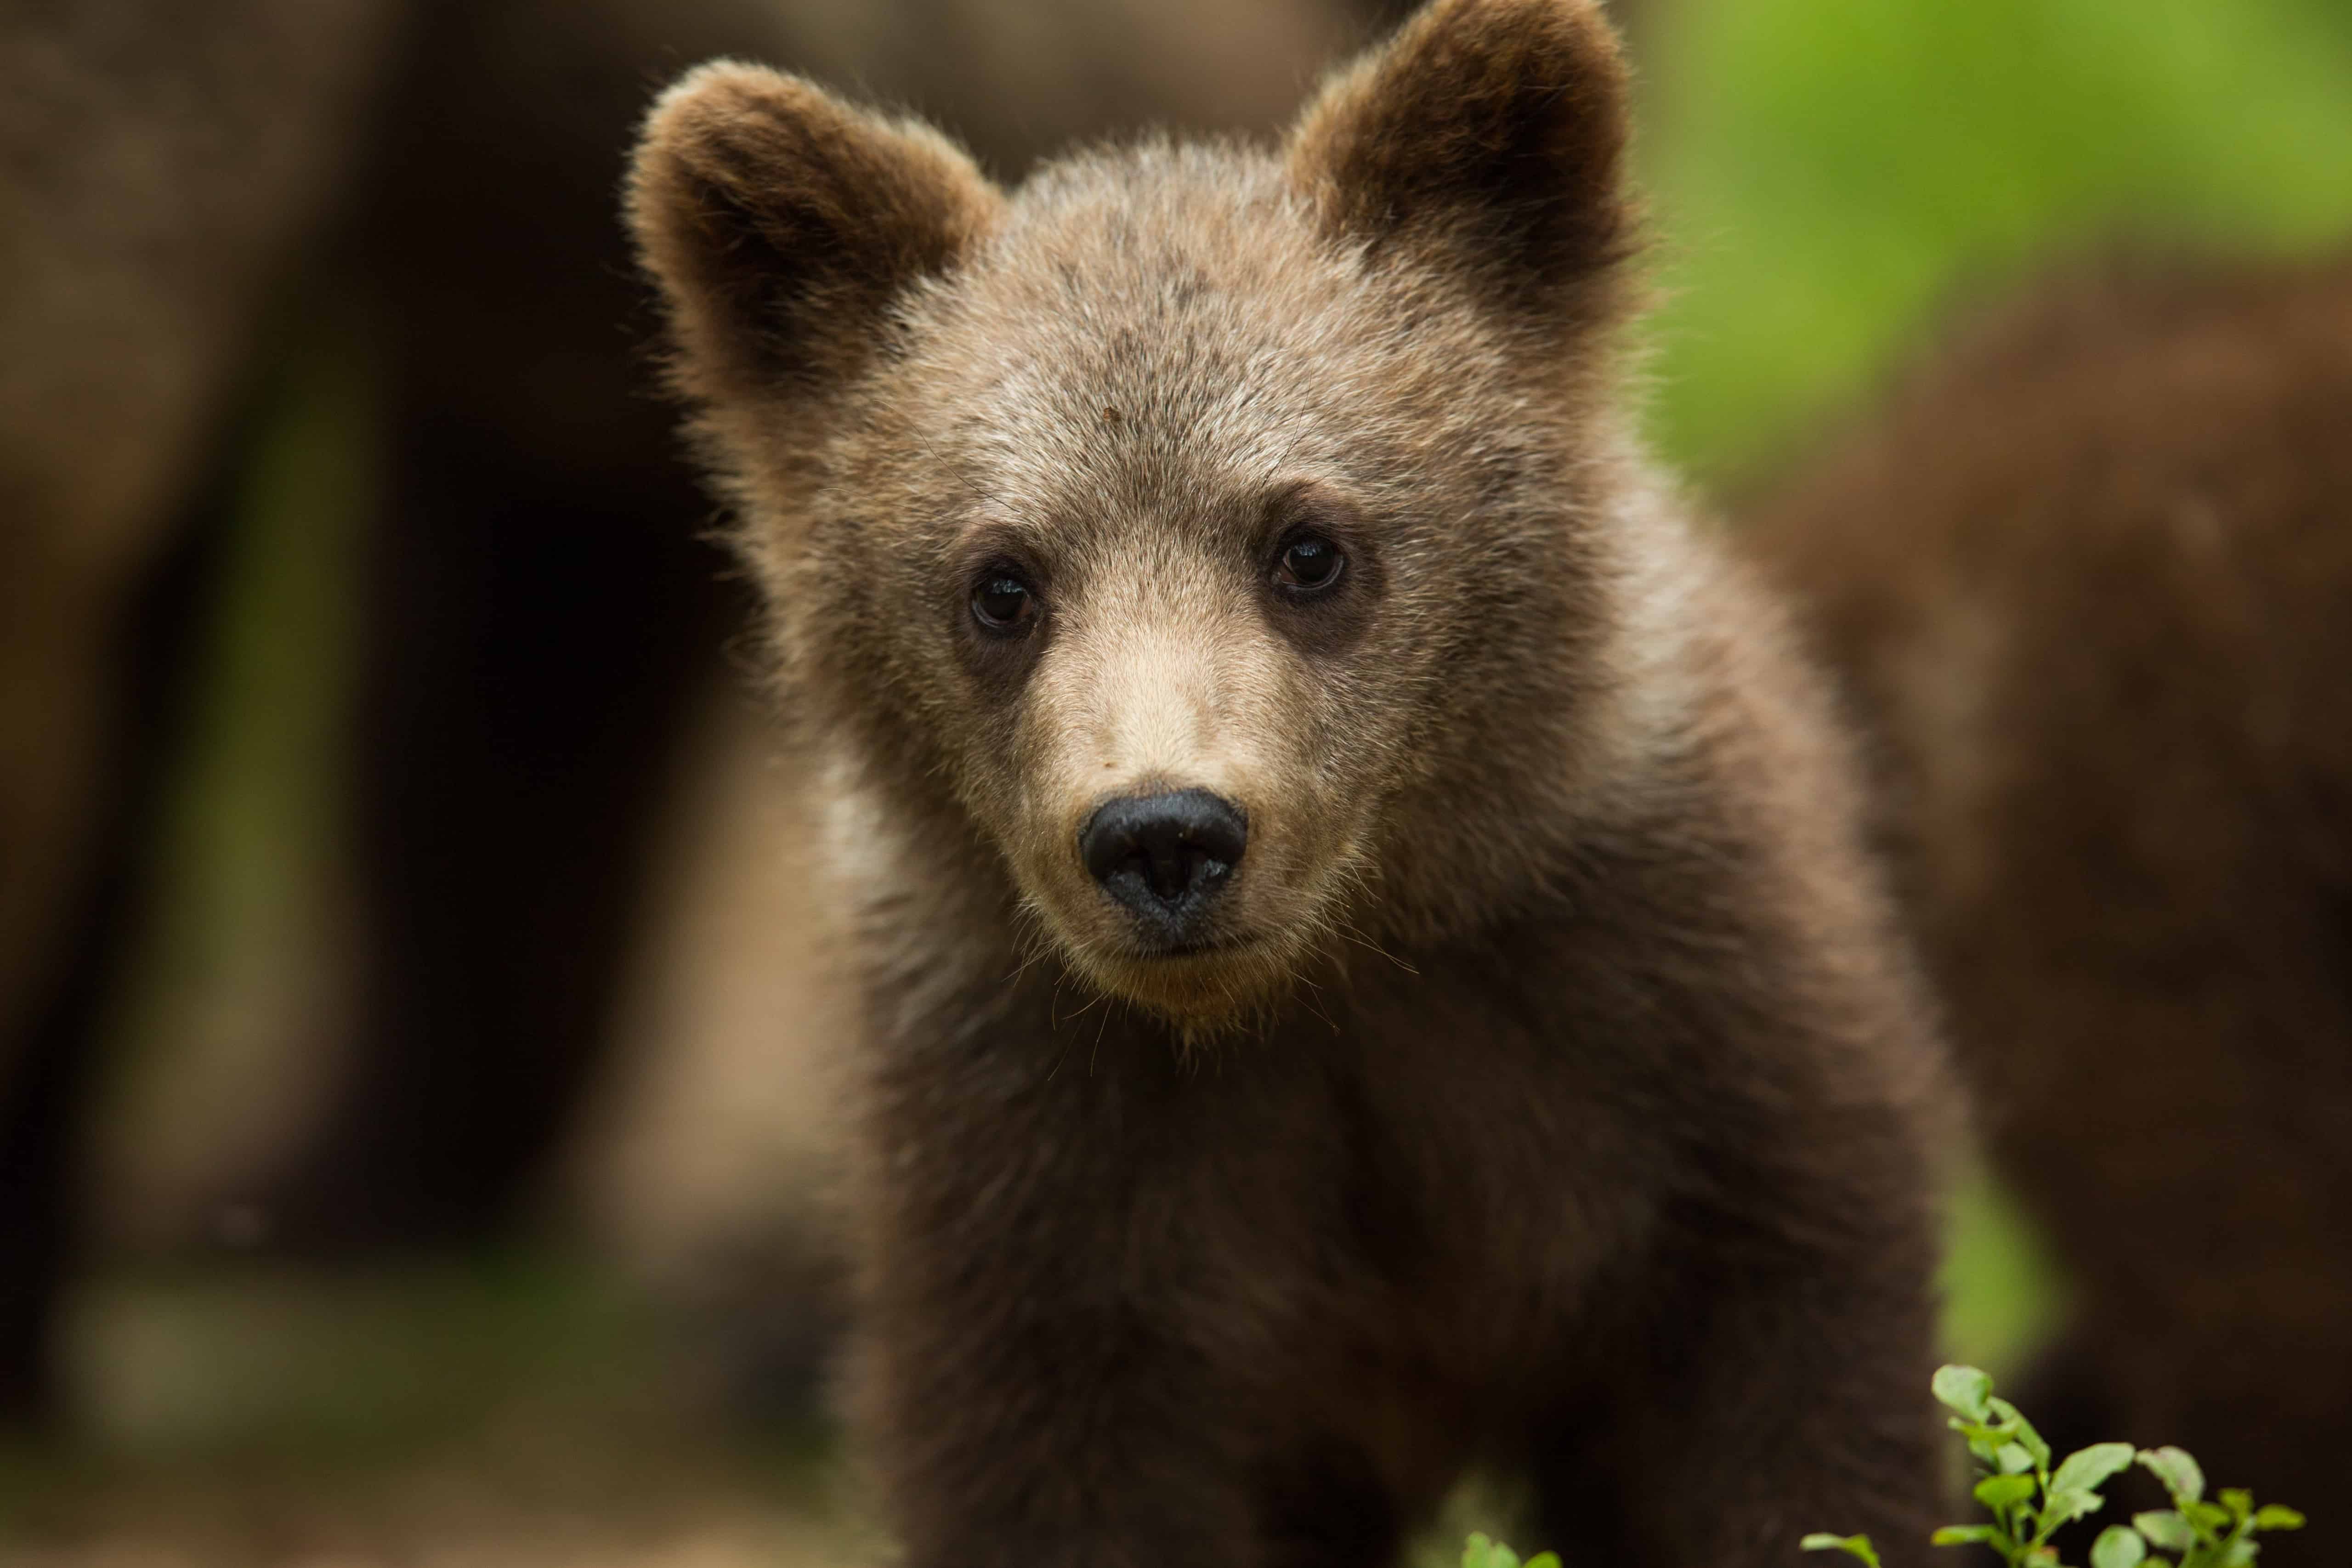 Petition: Pardon Woman Thrown in Jail for Freeing Crying Bear Cub